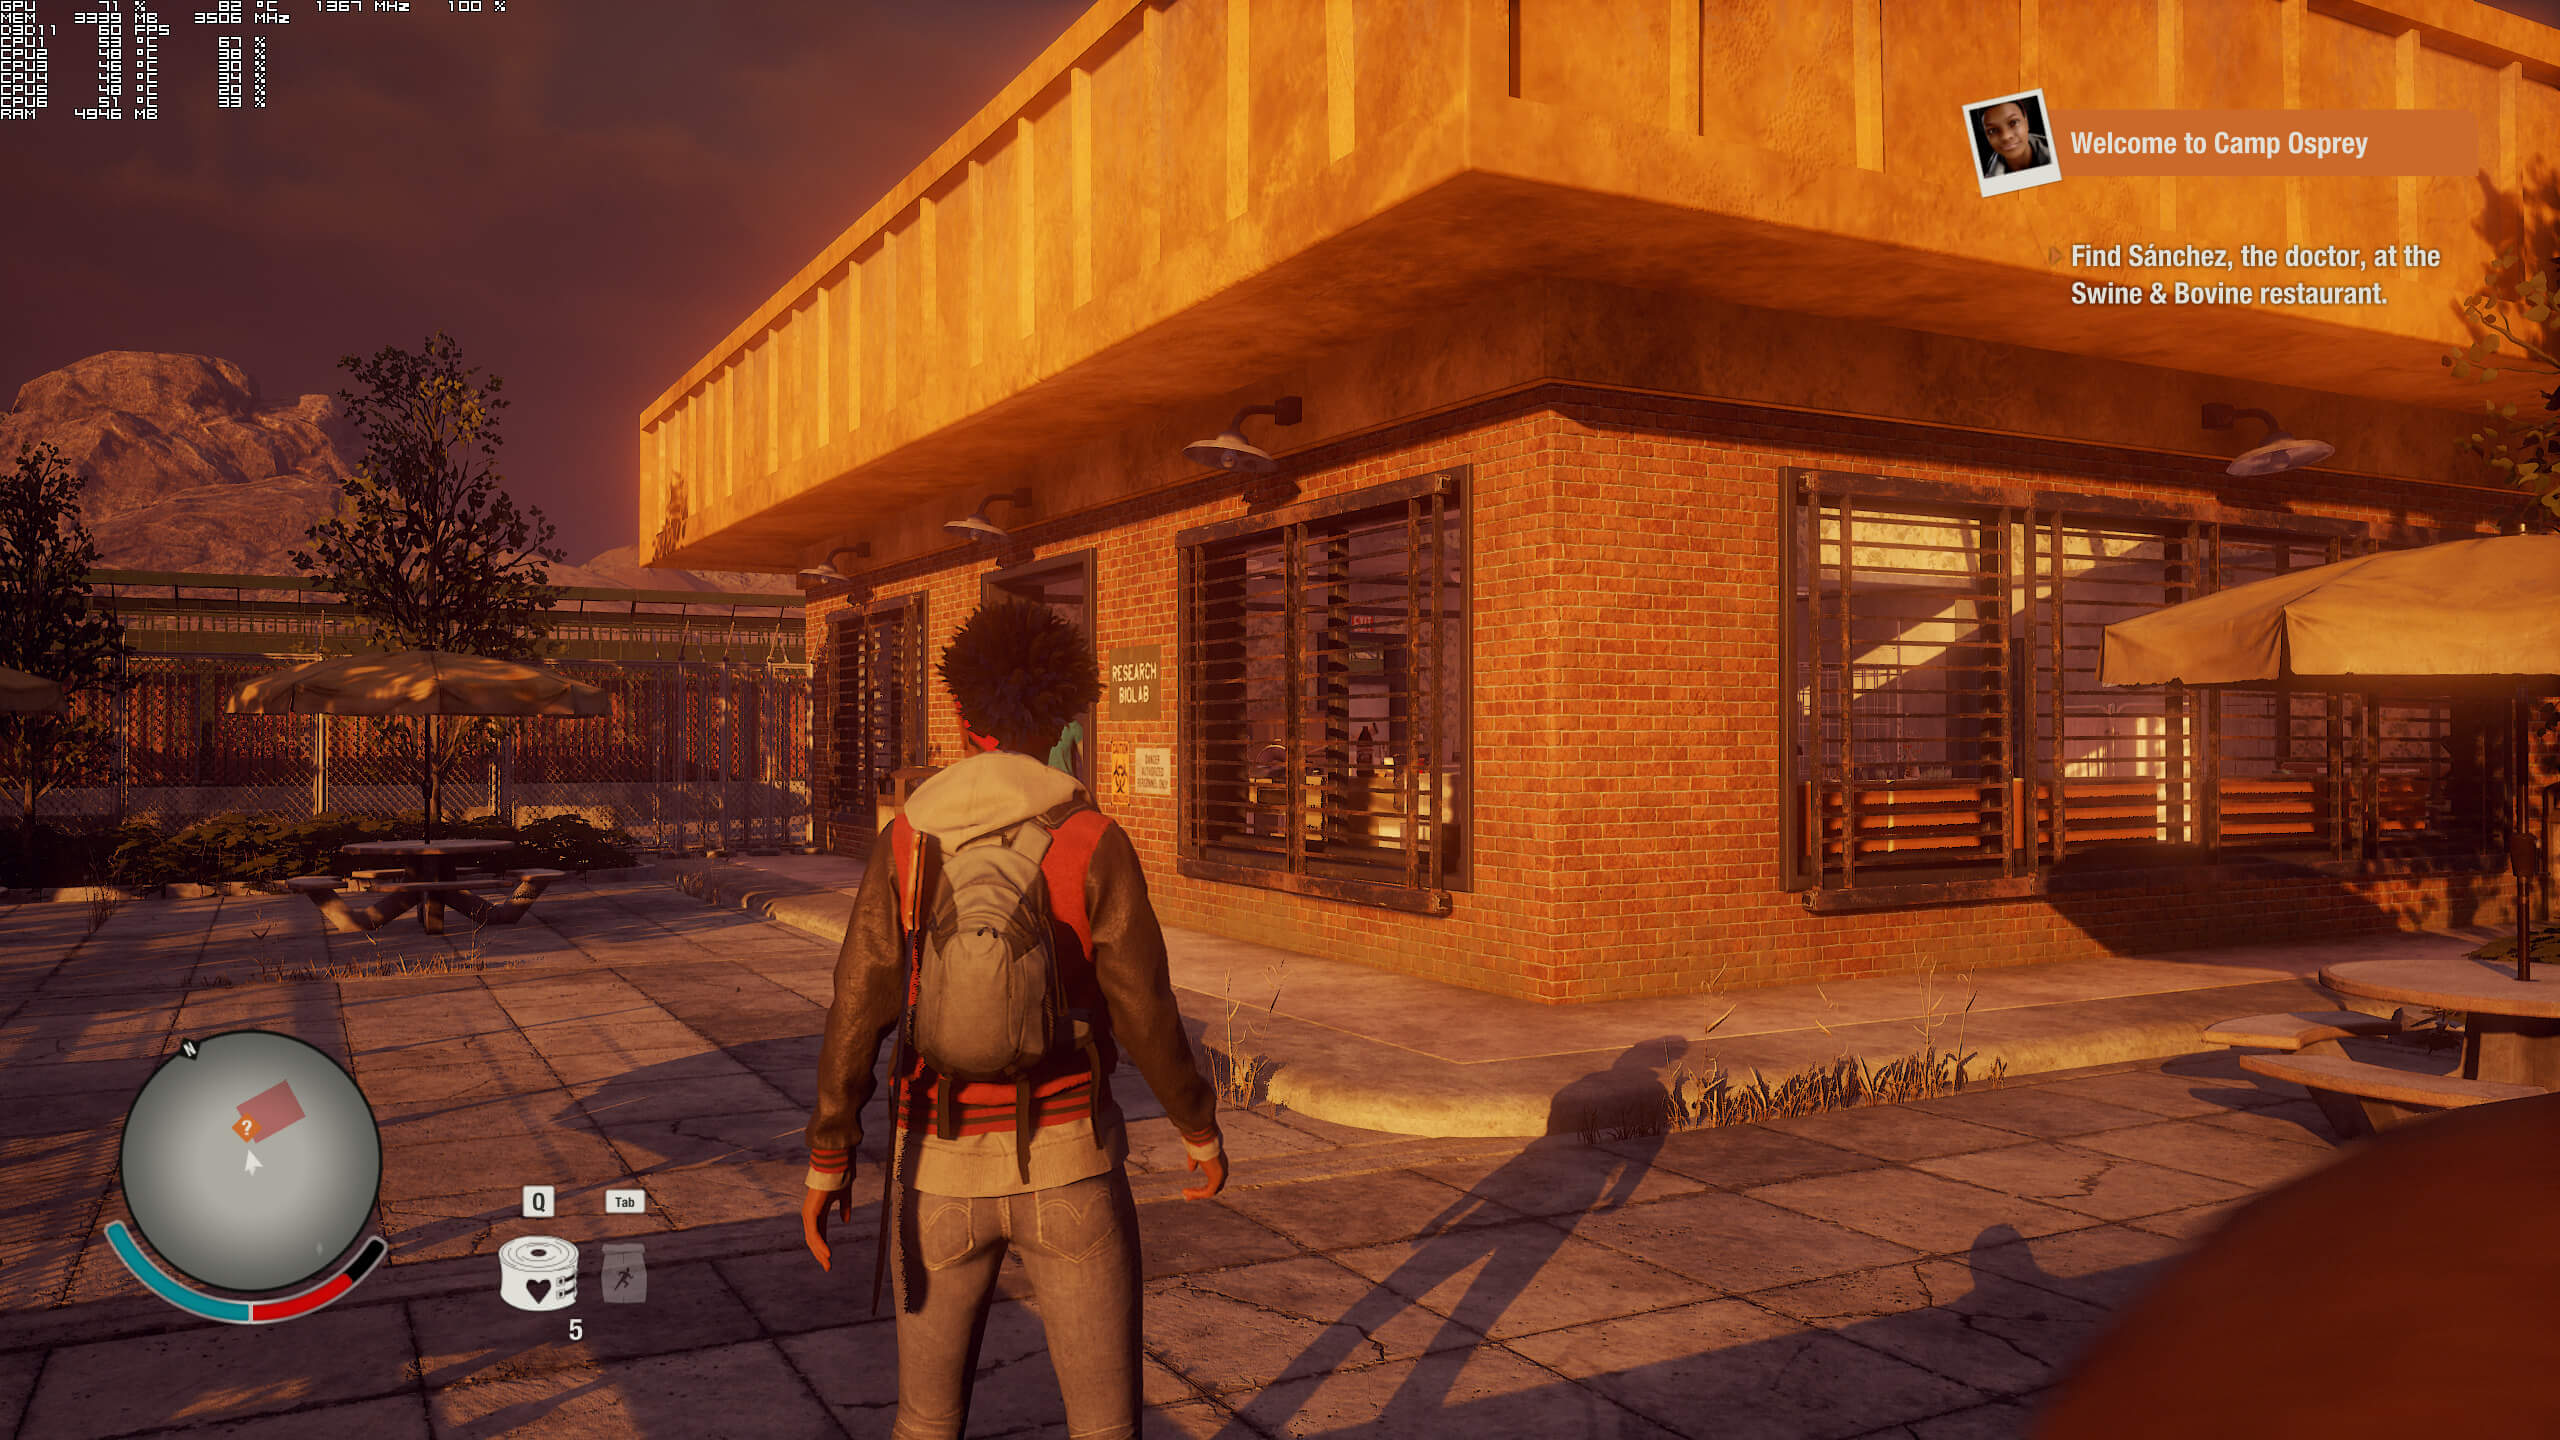 state of decay 2 more zombies mod